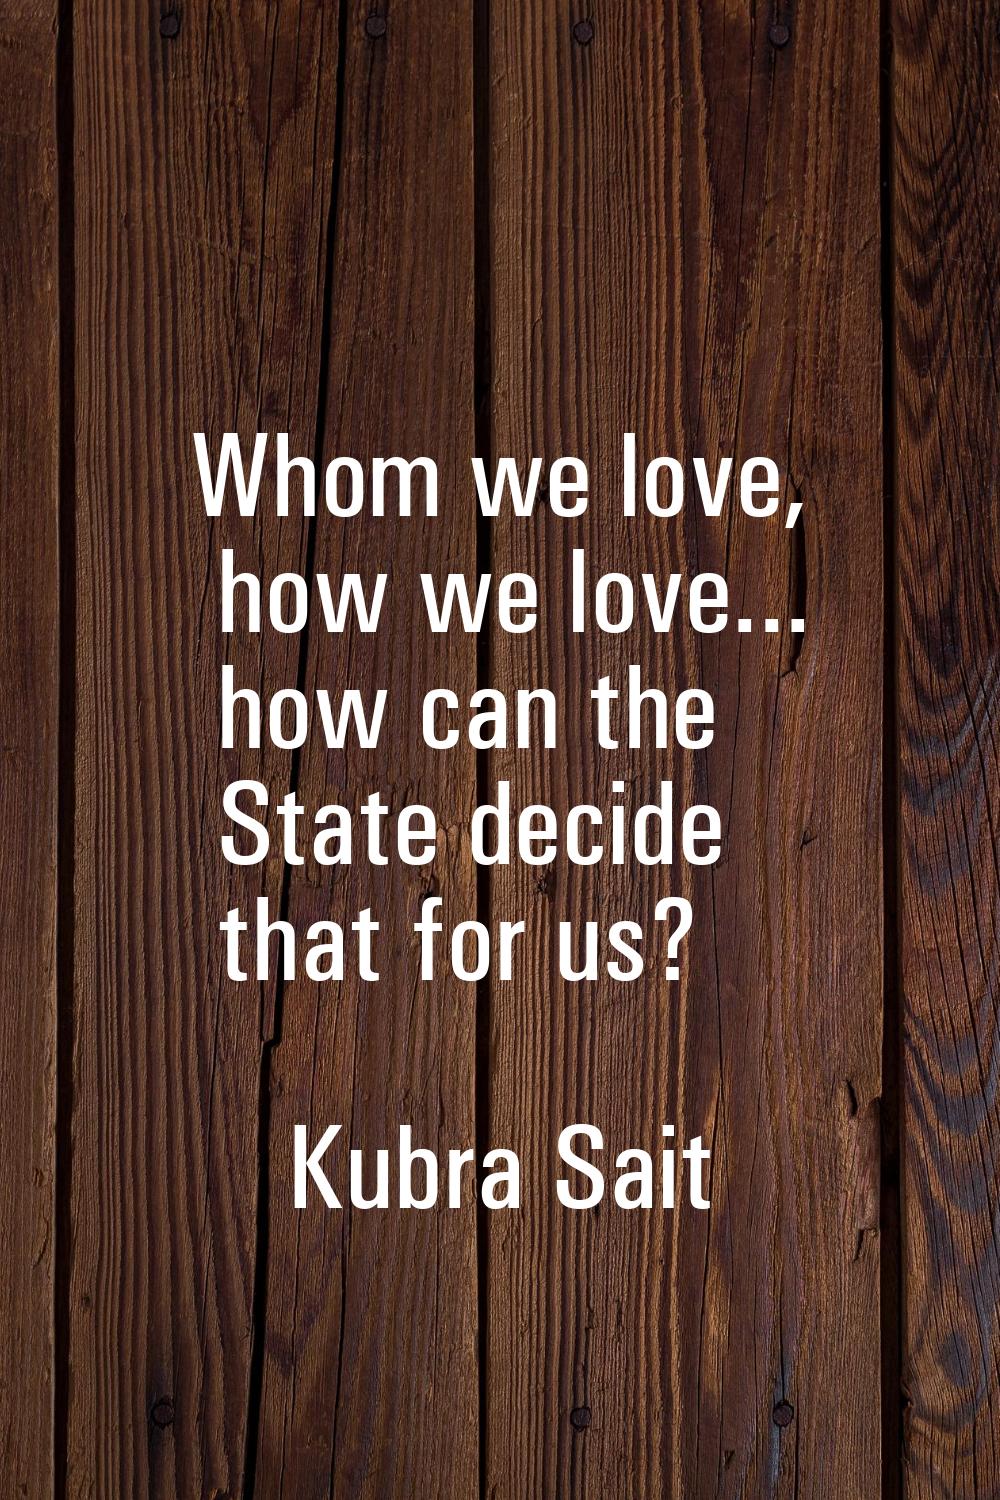 Whom we love, how we love... how can the State decide that for us?